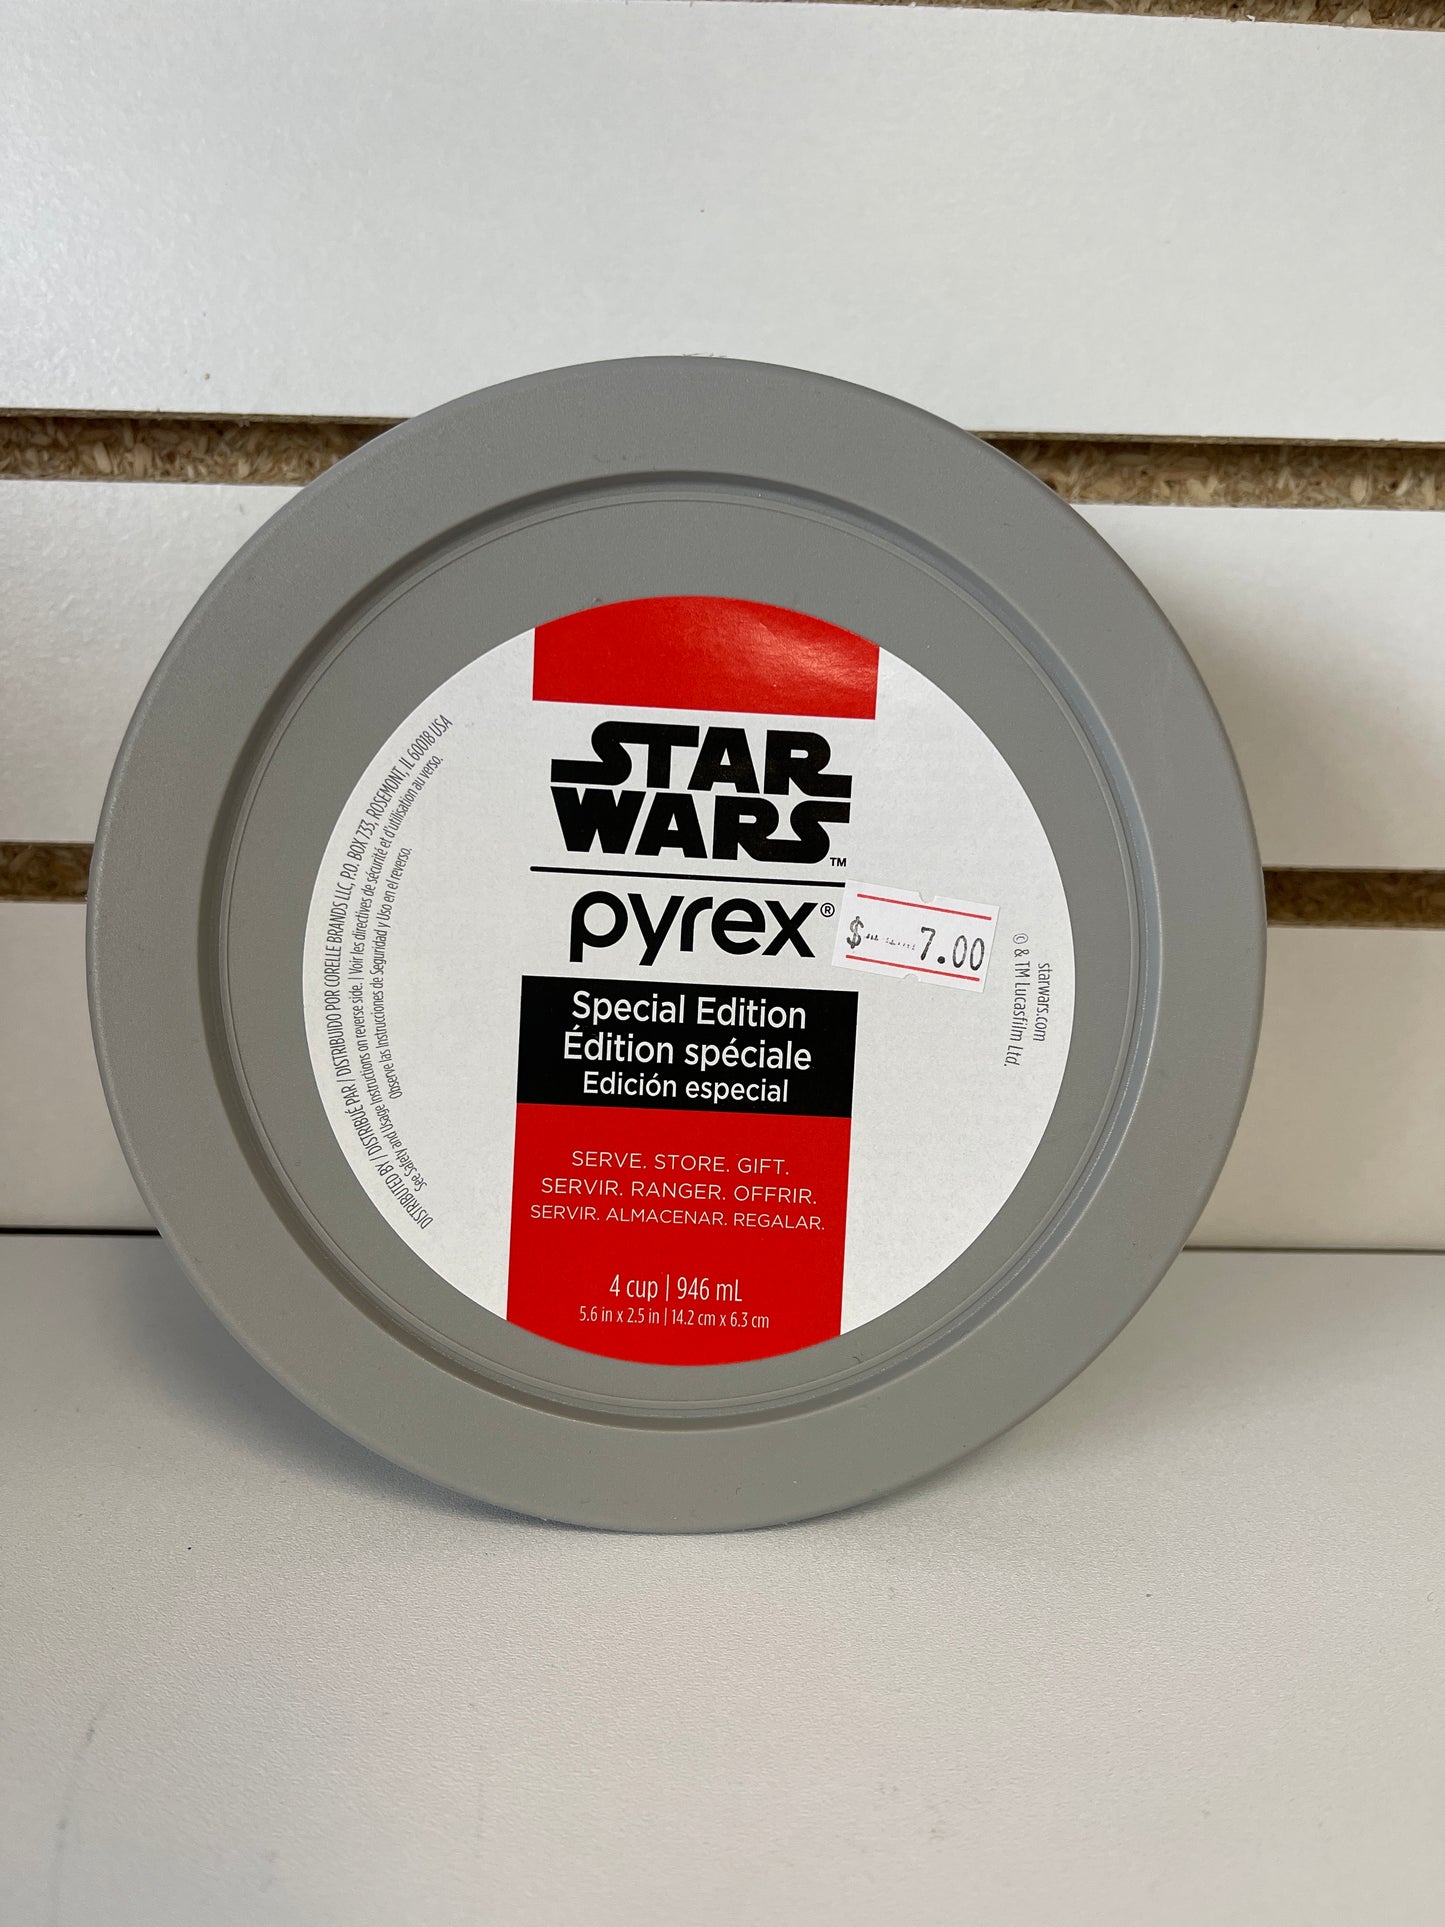 Star Wars Pyrex special edition